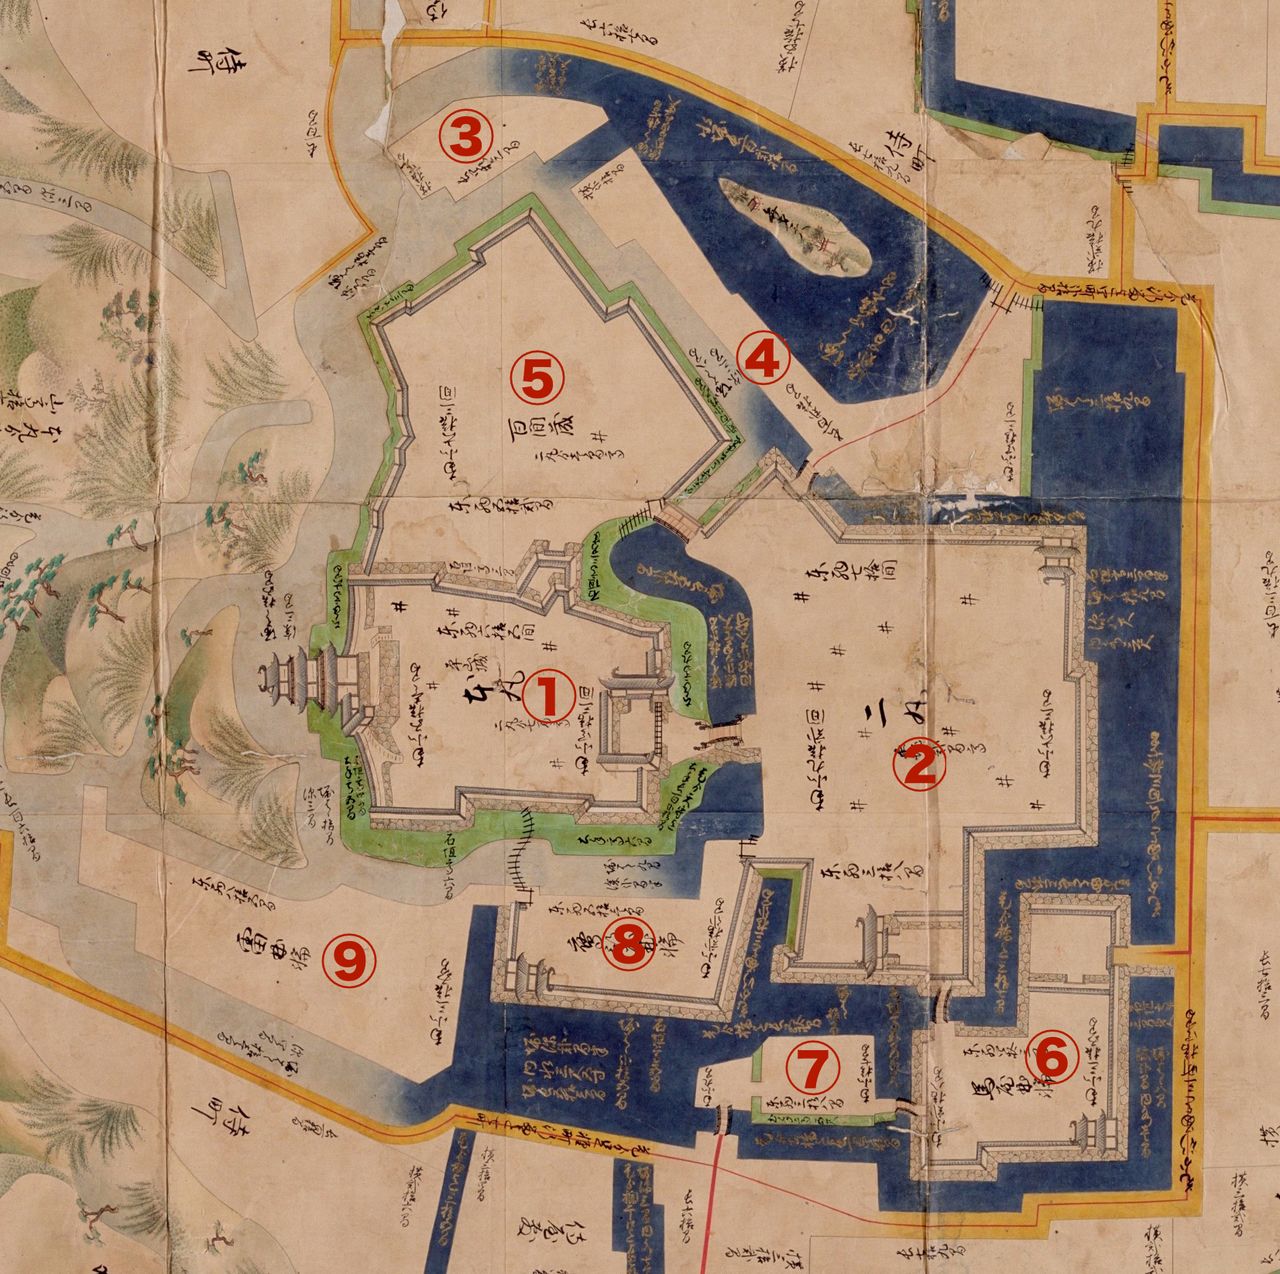 Odawara Castle in Kanagawa Prefecture as it appeared on the illustrated castle town map Shōhō shiro ezu drawn up in 1644. The number 1 indicates the honmaru, 2 the ninomaru, and 3 to 9 the other surrounding kuruwa. (Courtesy National Archives of Japan)